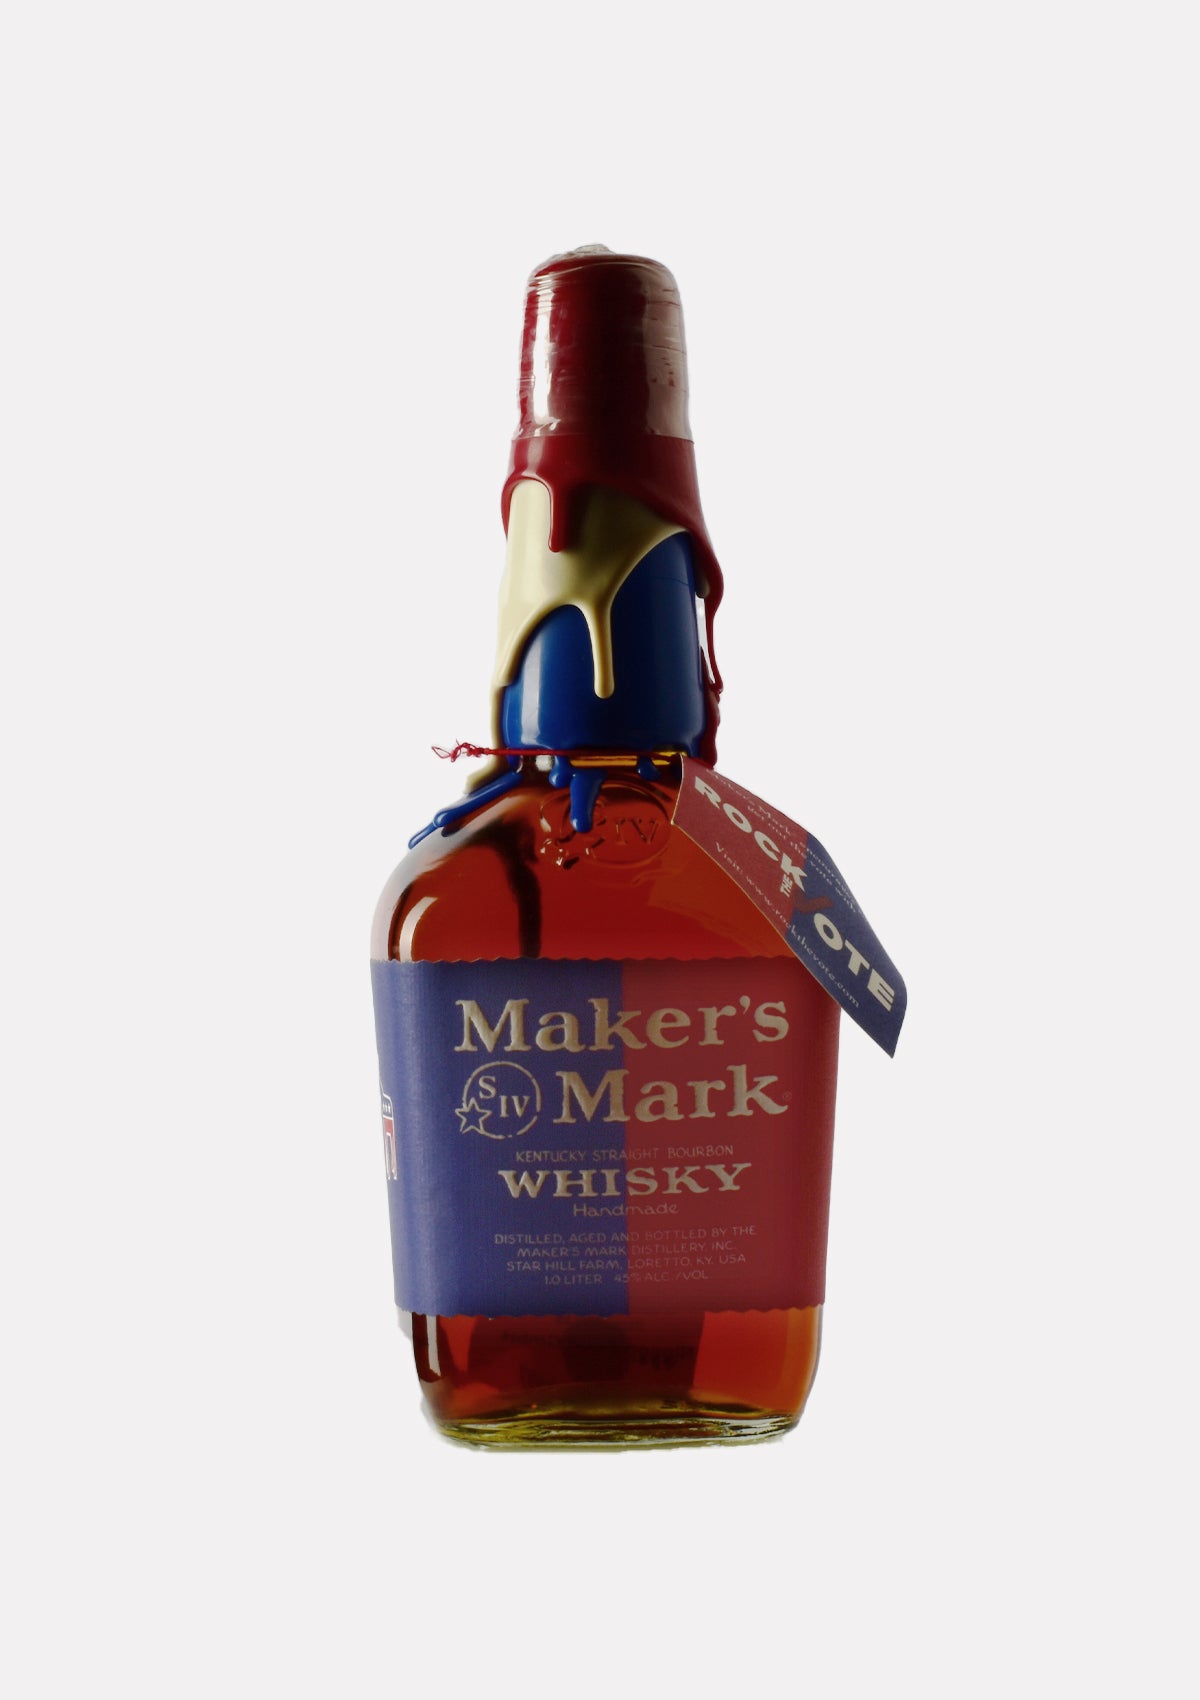 Maker's Mark Limited Edition Rock the Vote